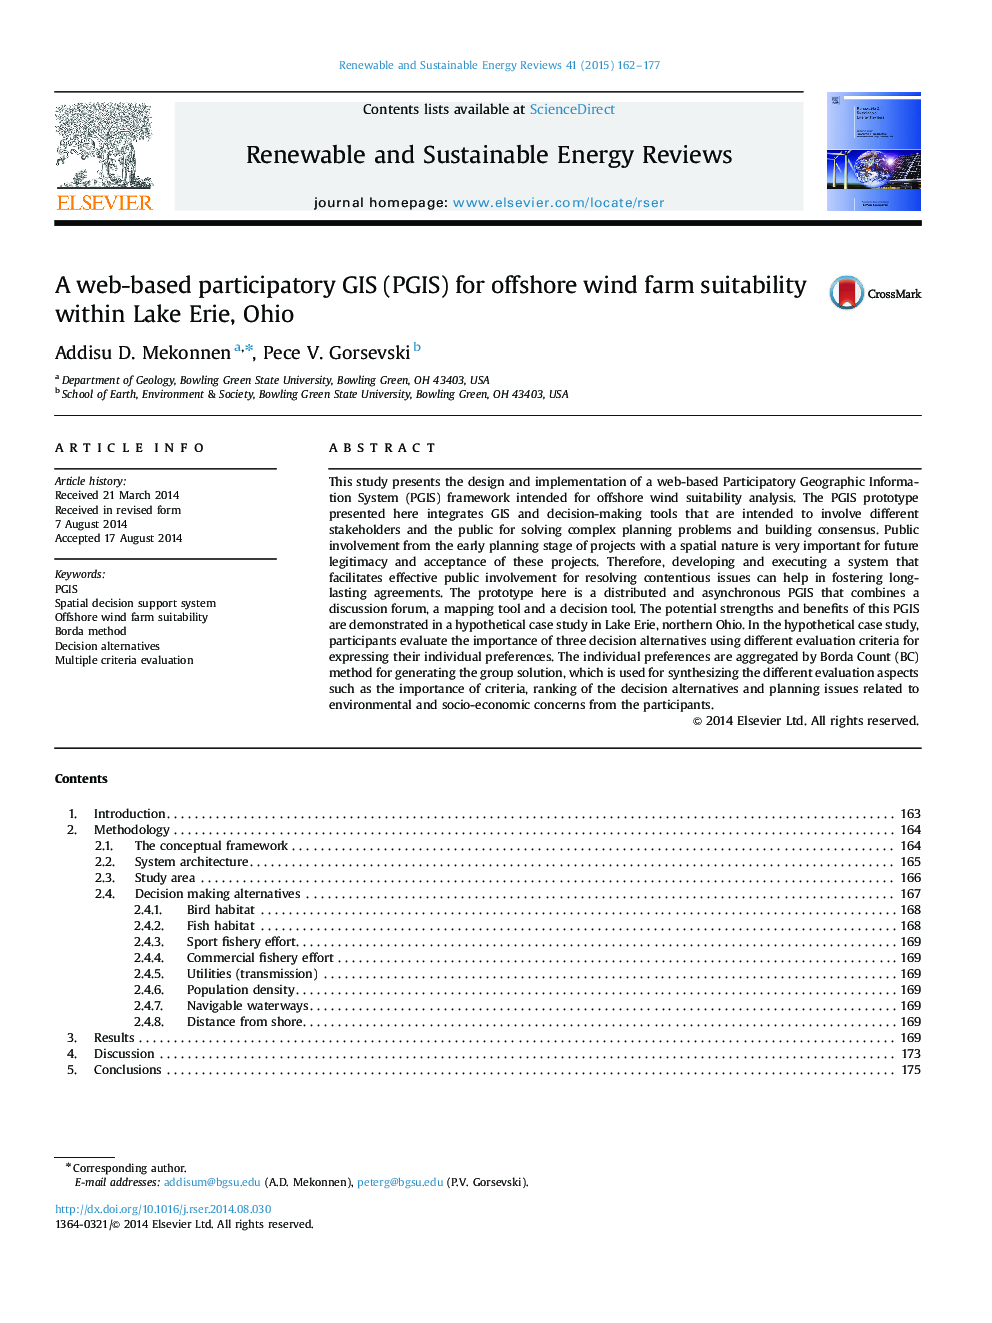 A web-based participatory GIS (PGIS) for offshore wind farm suitability within Lake Erie, Ohio